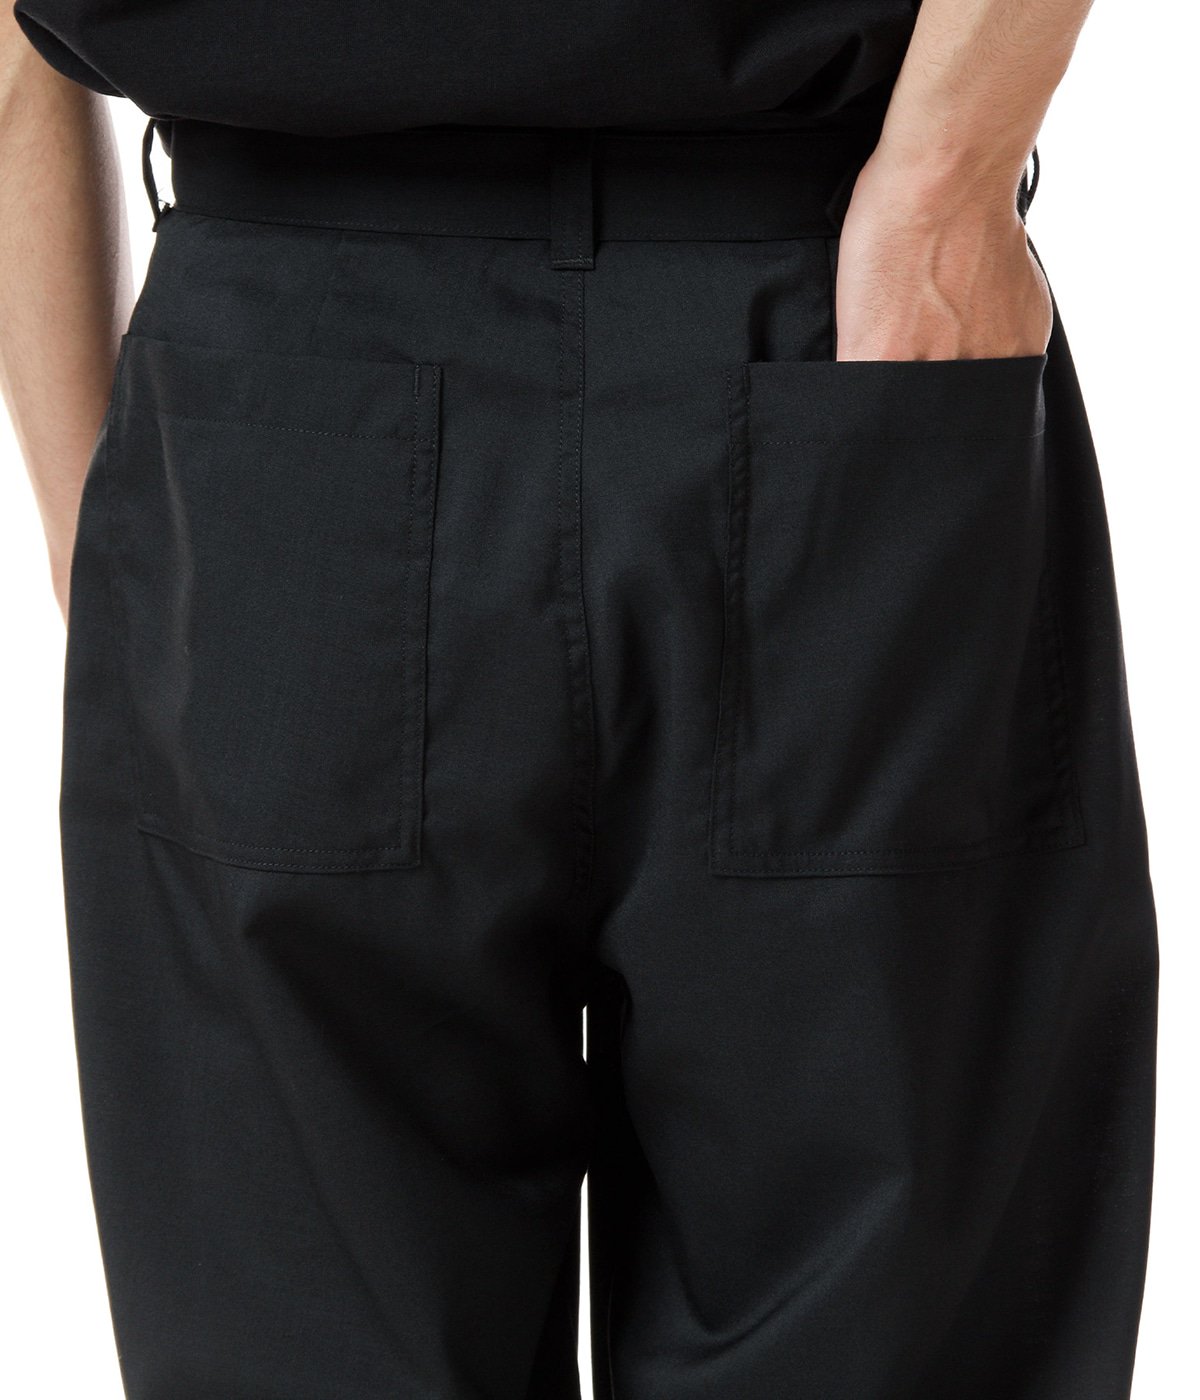 WIDE BELTED BAGGY TUCK TAPERED PANTS